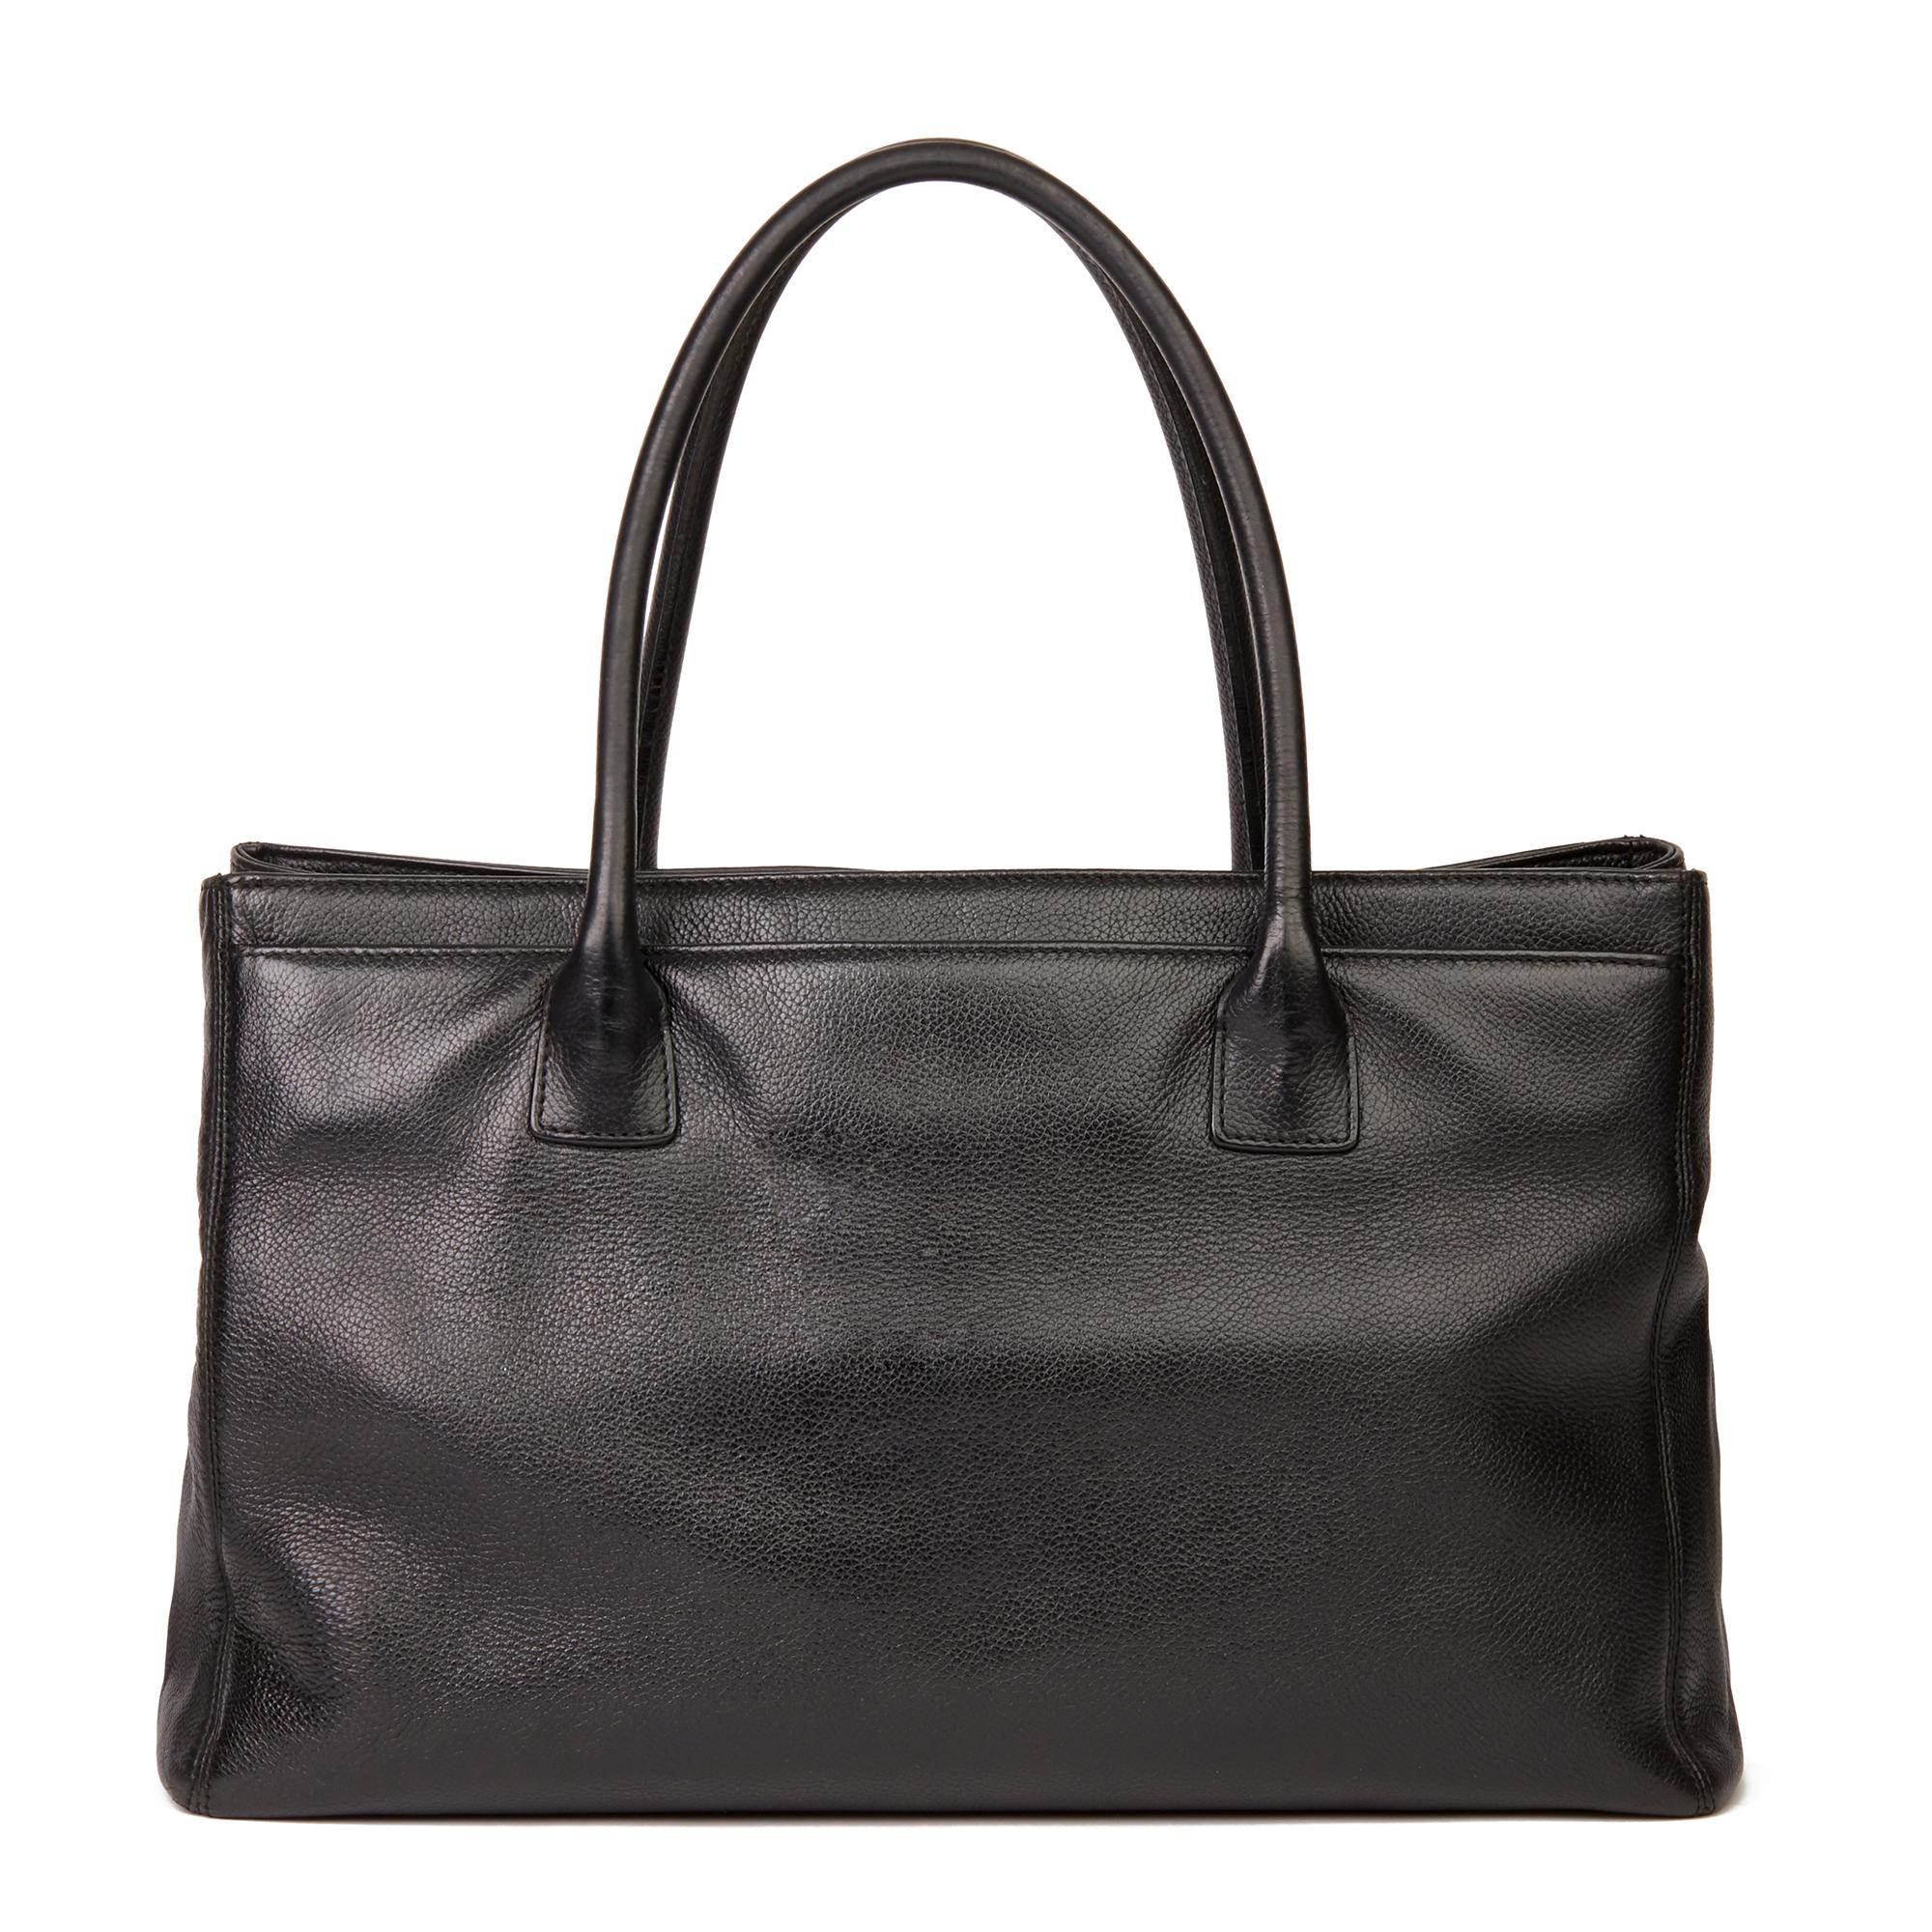 2009 Chanel Black Calfskin Leather Cerf Tote 1